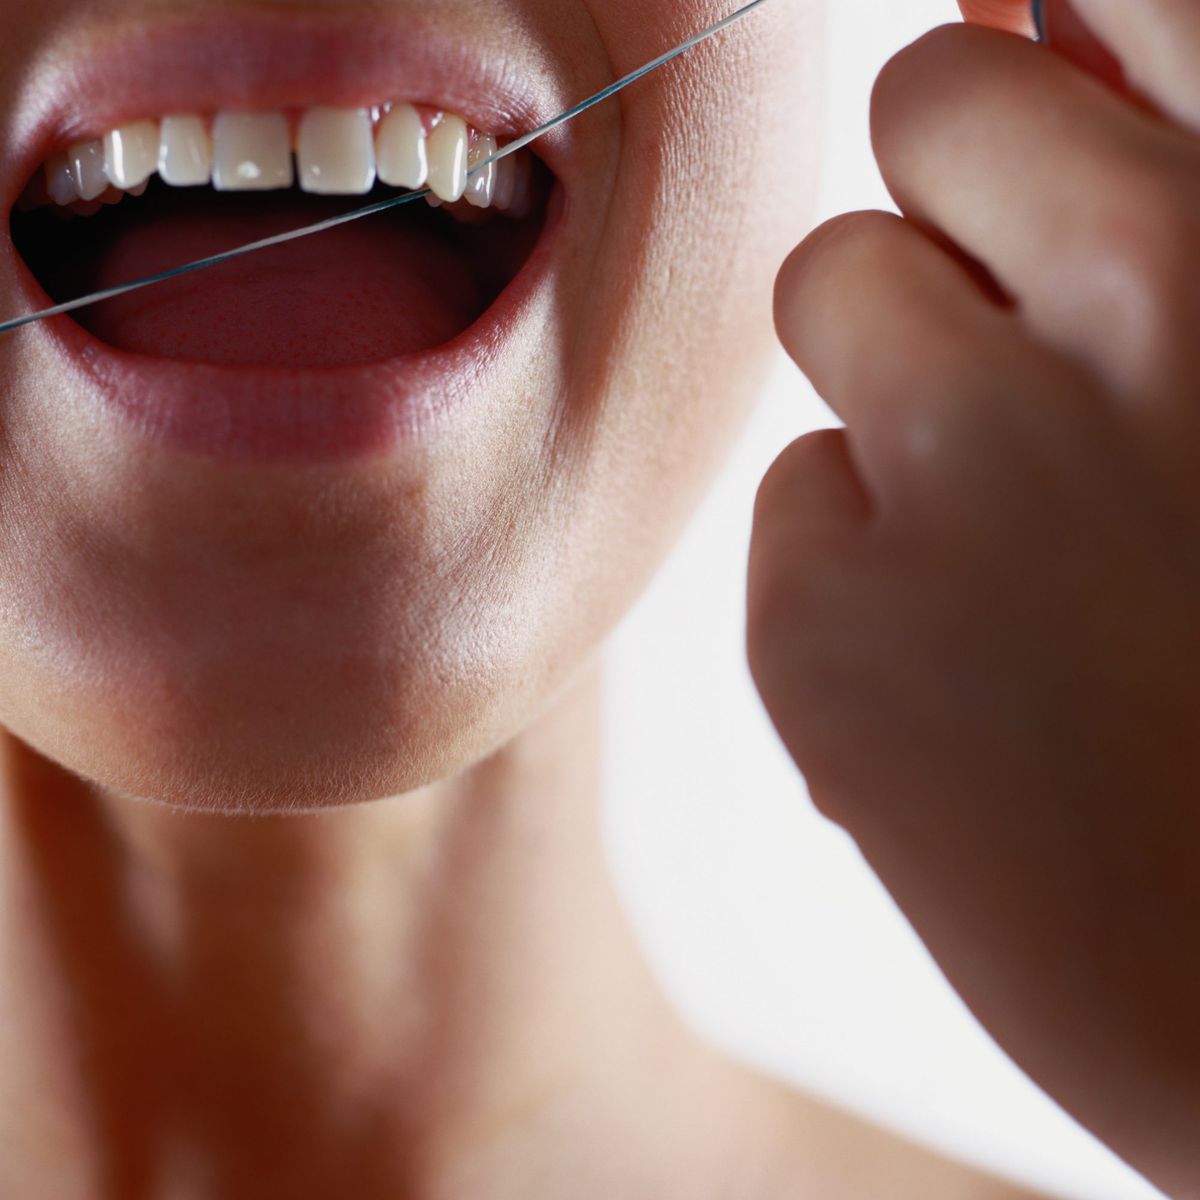 The Surprising Link Between Your Weight and Your Teeth